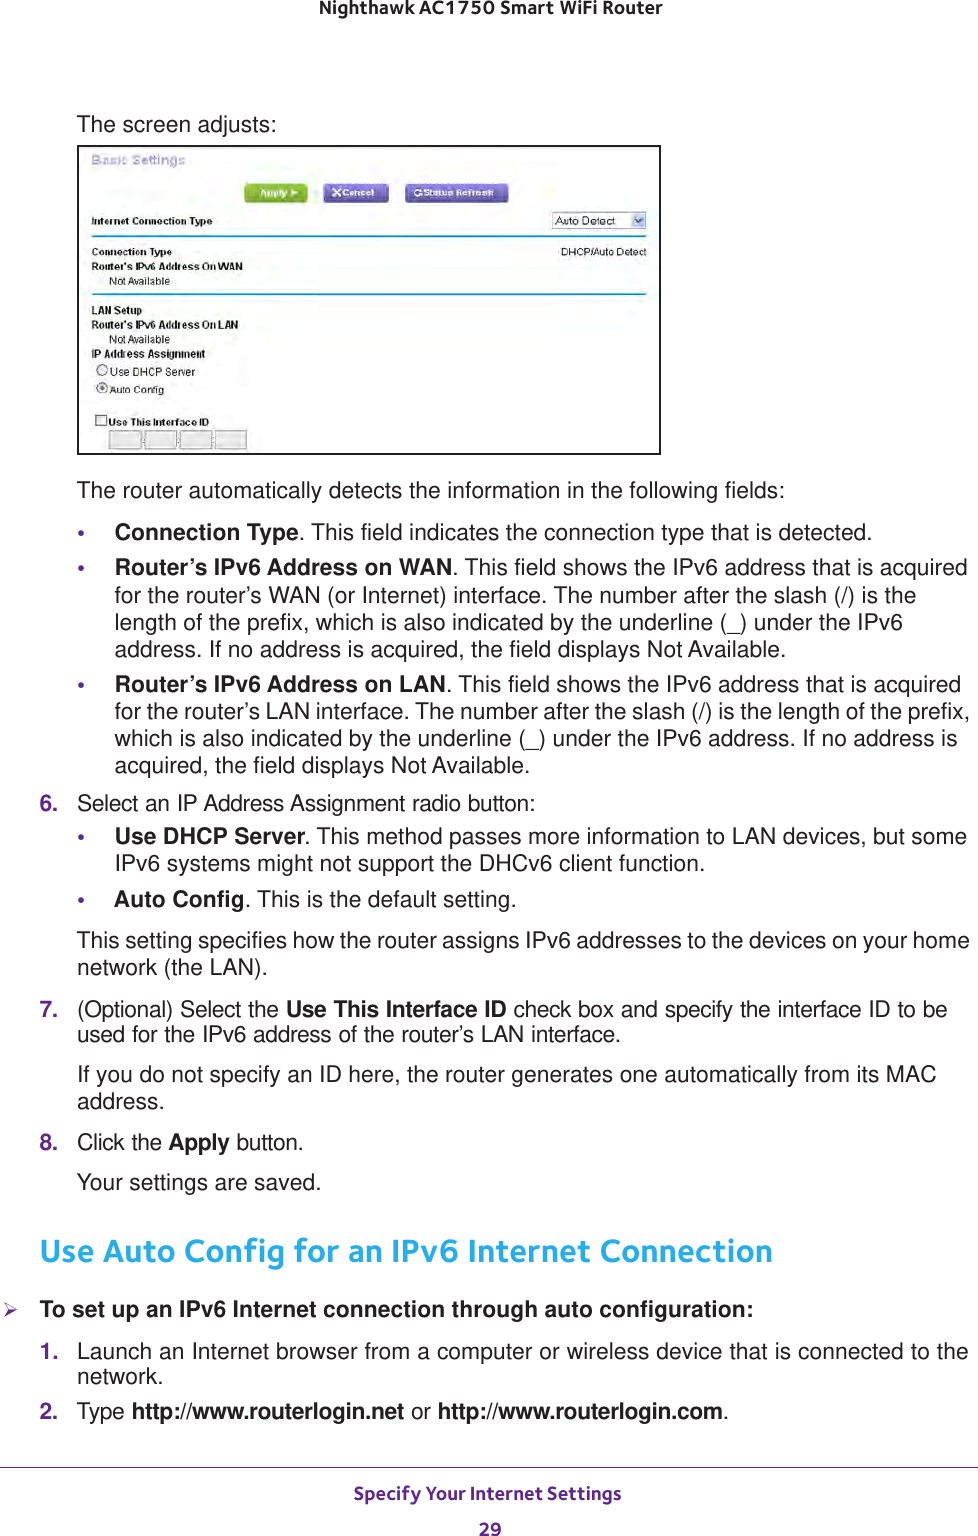 Specify Your Internet Settings 29 Nighthawk AC1750 Smart WiFi RouterThe screen adjusts:The router automatically detects the information in the following fields:•Connection Type. This field indicates the connection type that is detected.•Router’s IPv6 Address on WAN. This field shows the IPv6 address that is acquired for the router’s WAN (or Internet) interface. The number after the slash (/) is the length of the prefix, which is also indicated by the underline (_) under the IPv6 address. If no address is acquired, the field displays Not Available.•Router’s IPv6 Address on LAN. This field shows the IPv6 address that is acquired for the router’s LAN interface. The number after the slash (/) is the length of the prefix, which is also indicated by the underline (_) under the IPv6 address. If no address is acquired, the field displays Not Available.6.  Select an IP Address Assignment radio button:•Use DHCP Server. This method passes more information to LAN devices, but some IPv6 systems might not support the DHCv6 client function.•Auto Config. This is the default setting.This setting specifies how the router assigns IPv6 addresses to the devices on your home network (the LAN).7.  (Optional) Select the Use This Interface ID check box and specify the interface ID to be used for the IPv6 address of the router’s LAN interface.If you do not specify an ID here, the router generates one automatically from its MAC address.8.  Click the Apply button.Your settings are saved.Use Auto Config for an IPv6 Internet ConnectionTo set up an IPv6 Internet connection through auto configuration:1.  Launch an Internet browser from a computer or wireless device that is connected to the network.2.  Type http://www.routerlogin.net or http://www.routerlogin.com.